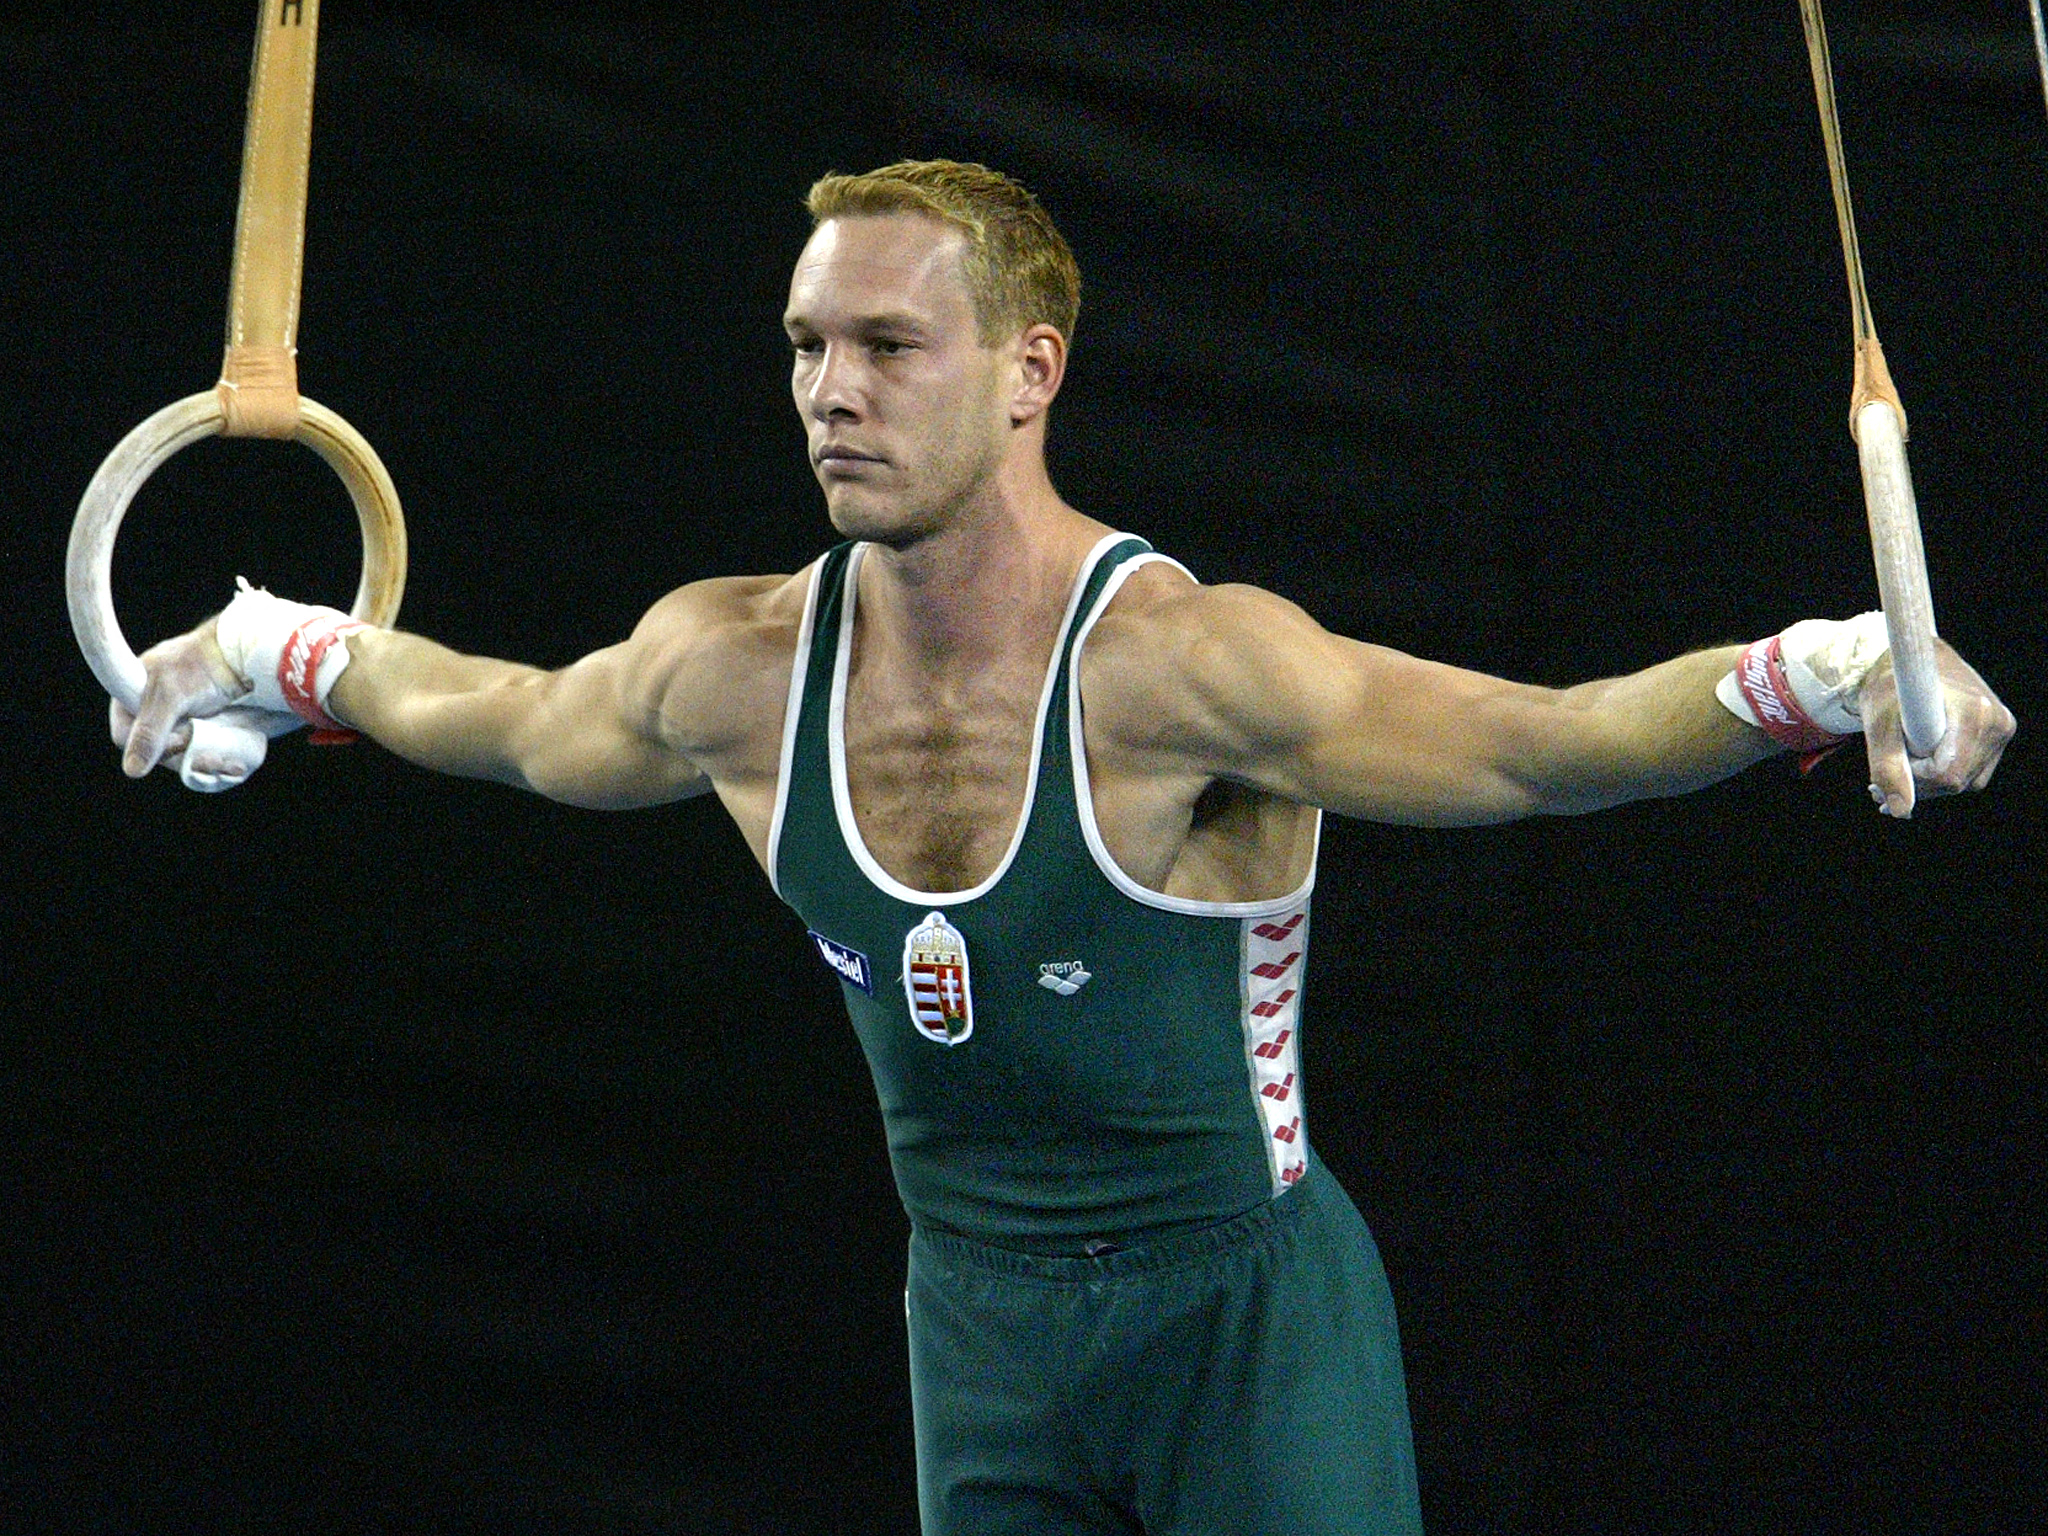 HUNGARIAN OLYMPIC CHAMPION CSOLLANY PERFORMS AT 36TH WORLD GYMNASTICS
CHAMPIONSHIPS IN DEBRECEN.